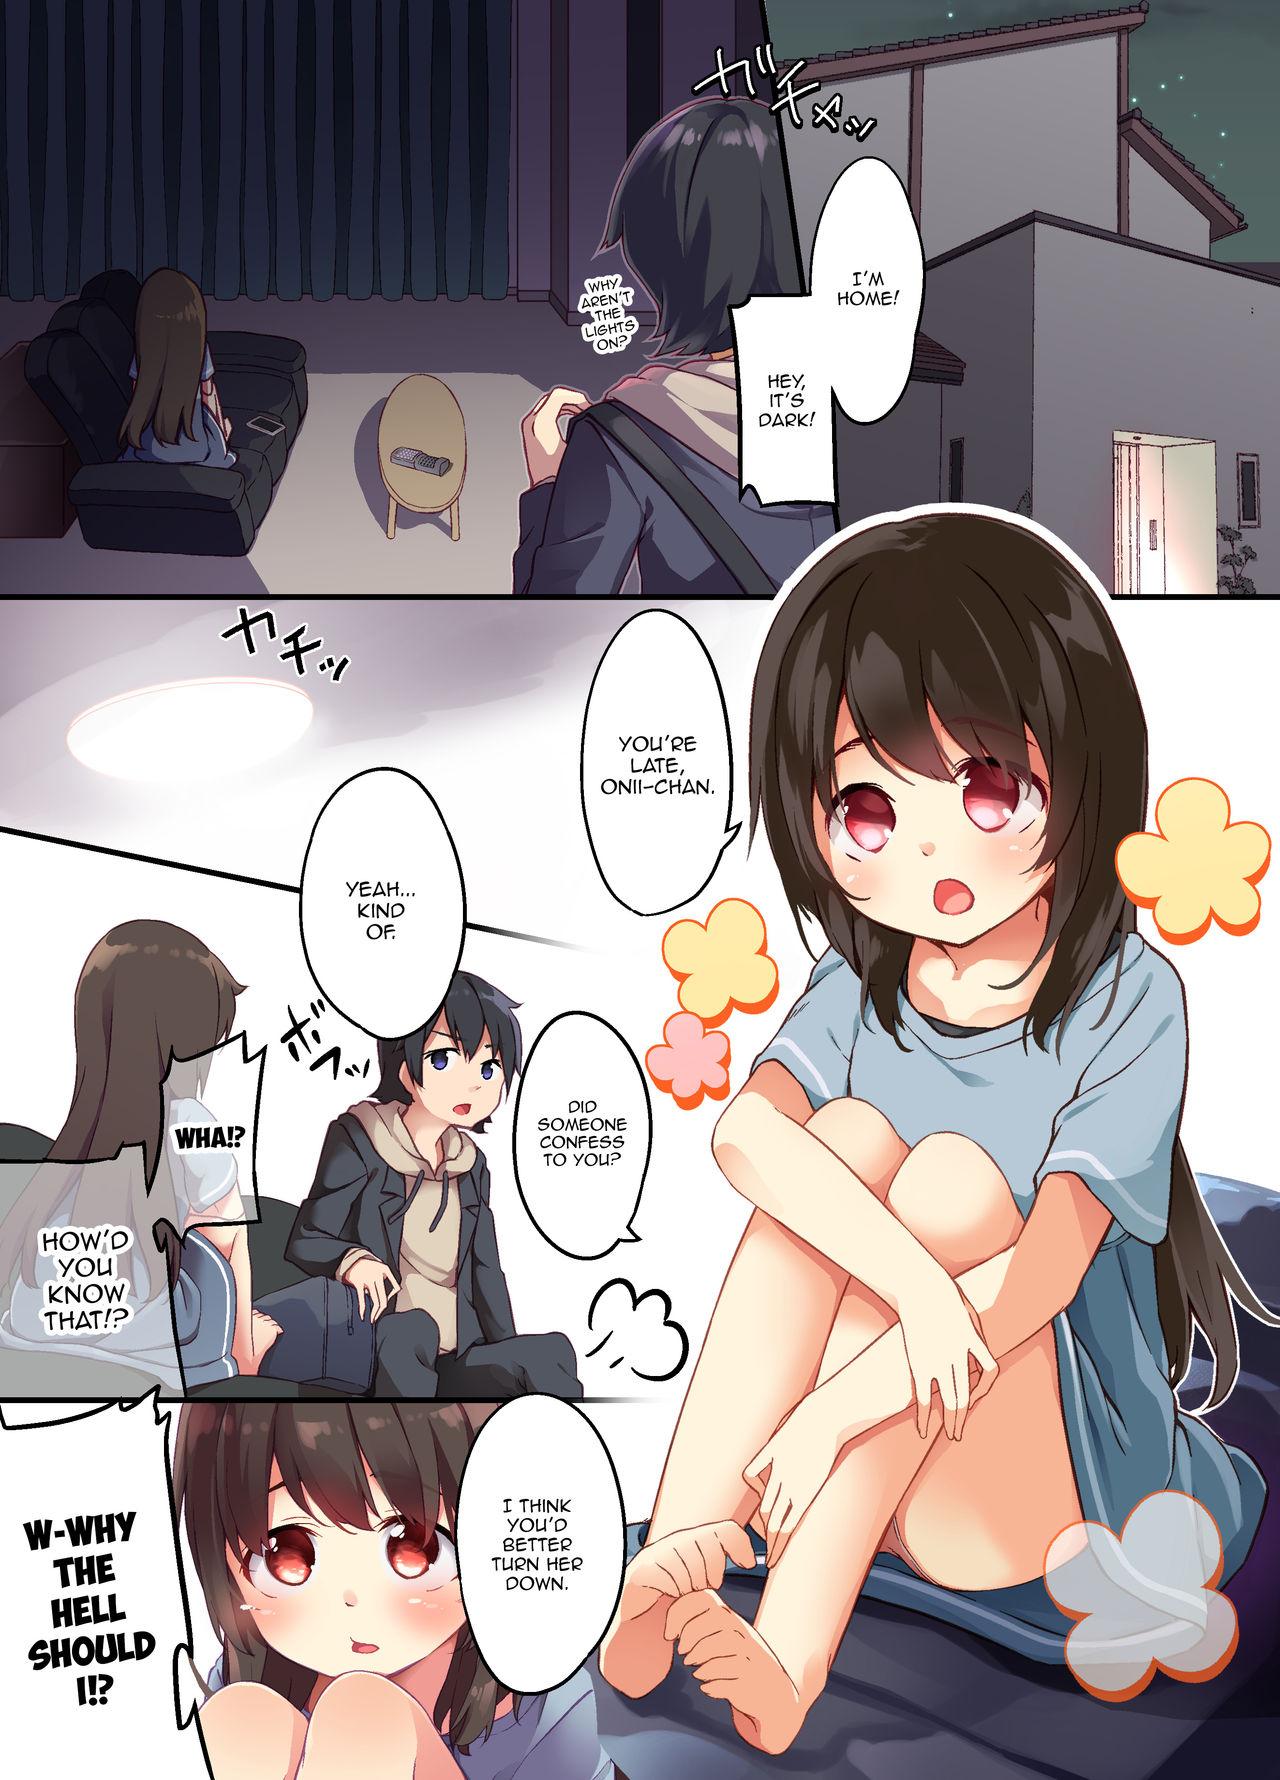 A Yandere Little Sister Wants to Be Impregnated by Her Big Brother, So She Switches Bodies With Him and They Have Baby-Making Sex 2